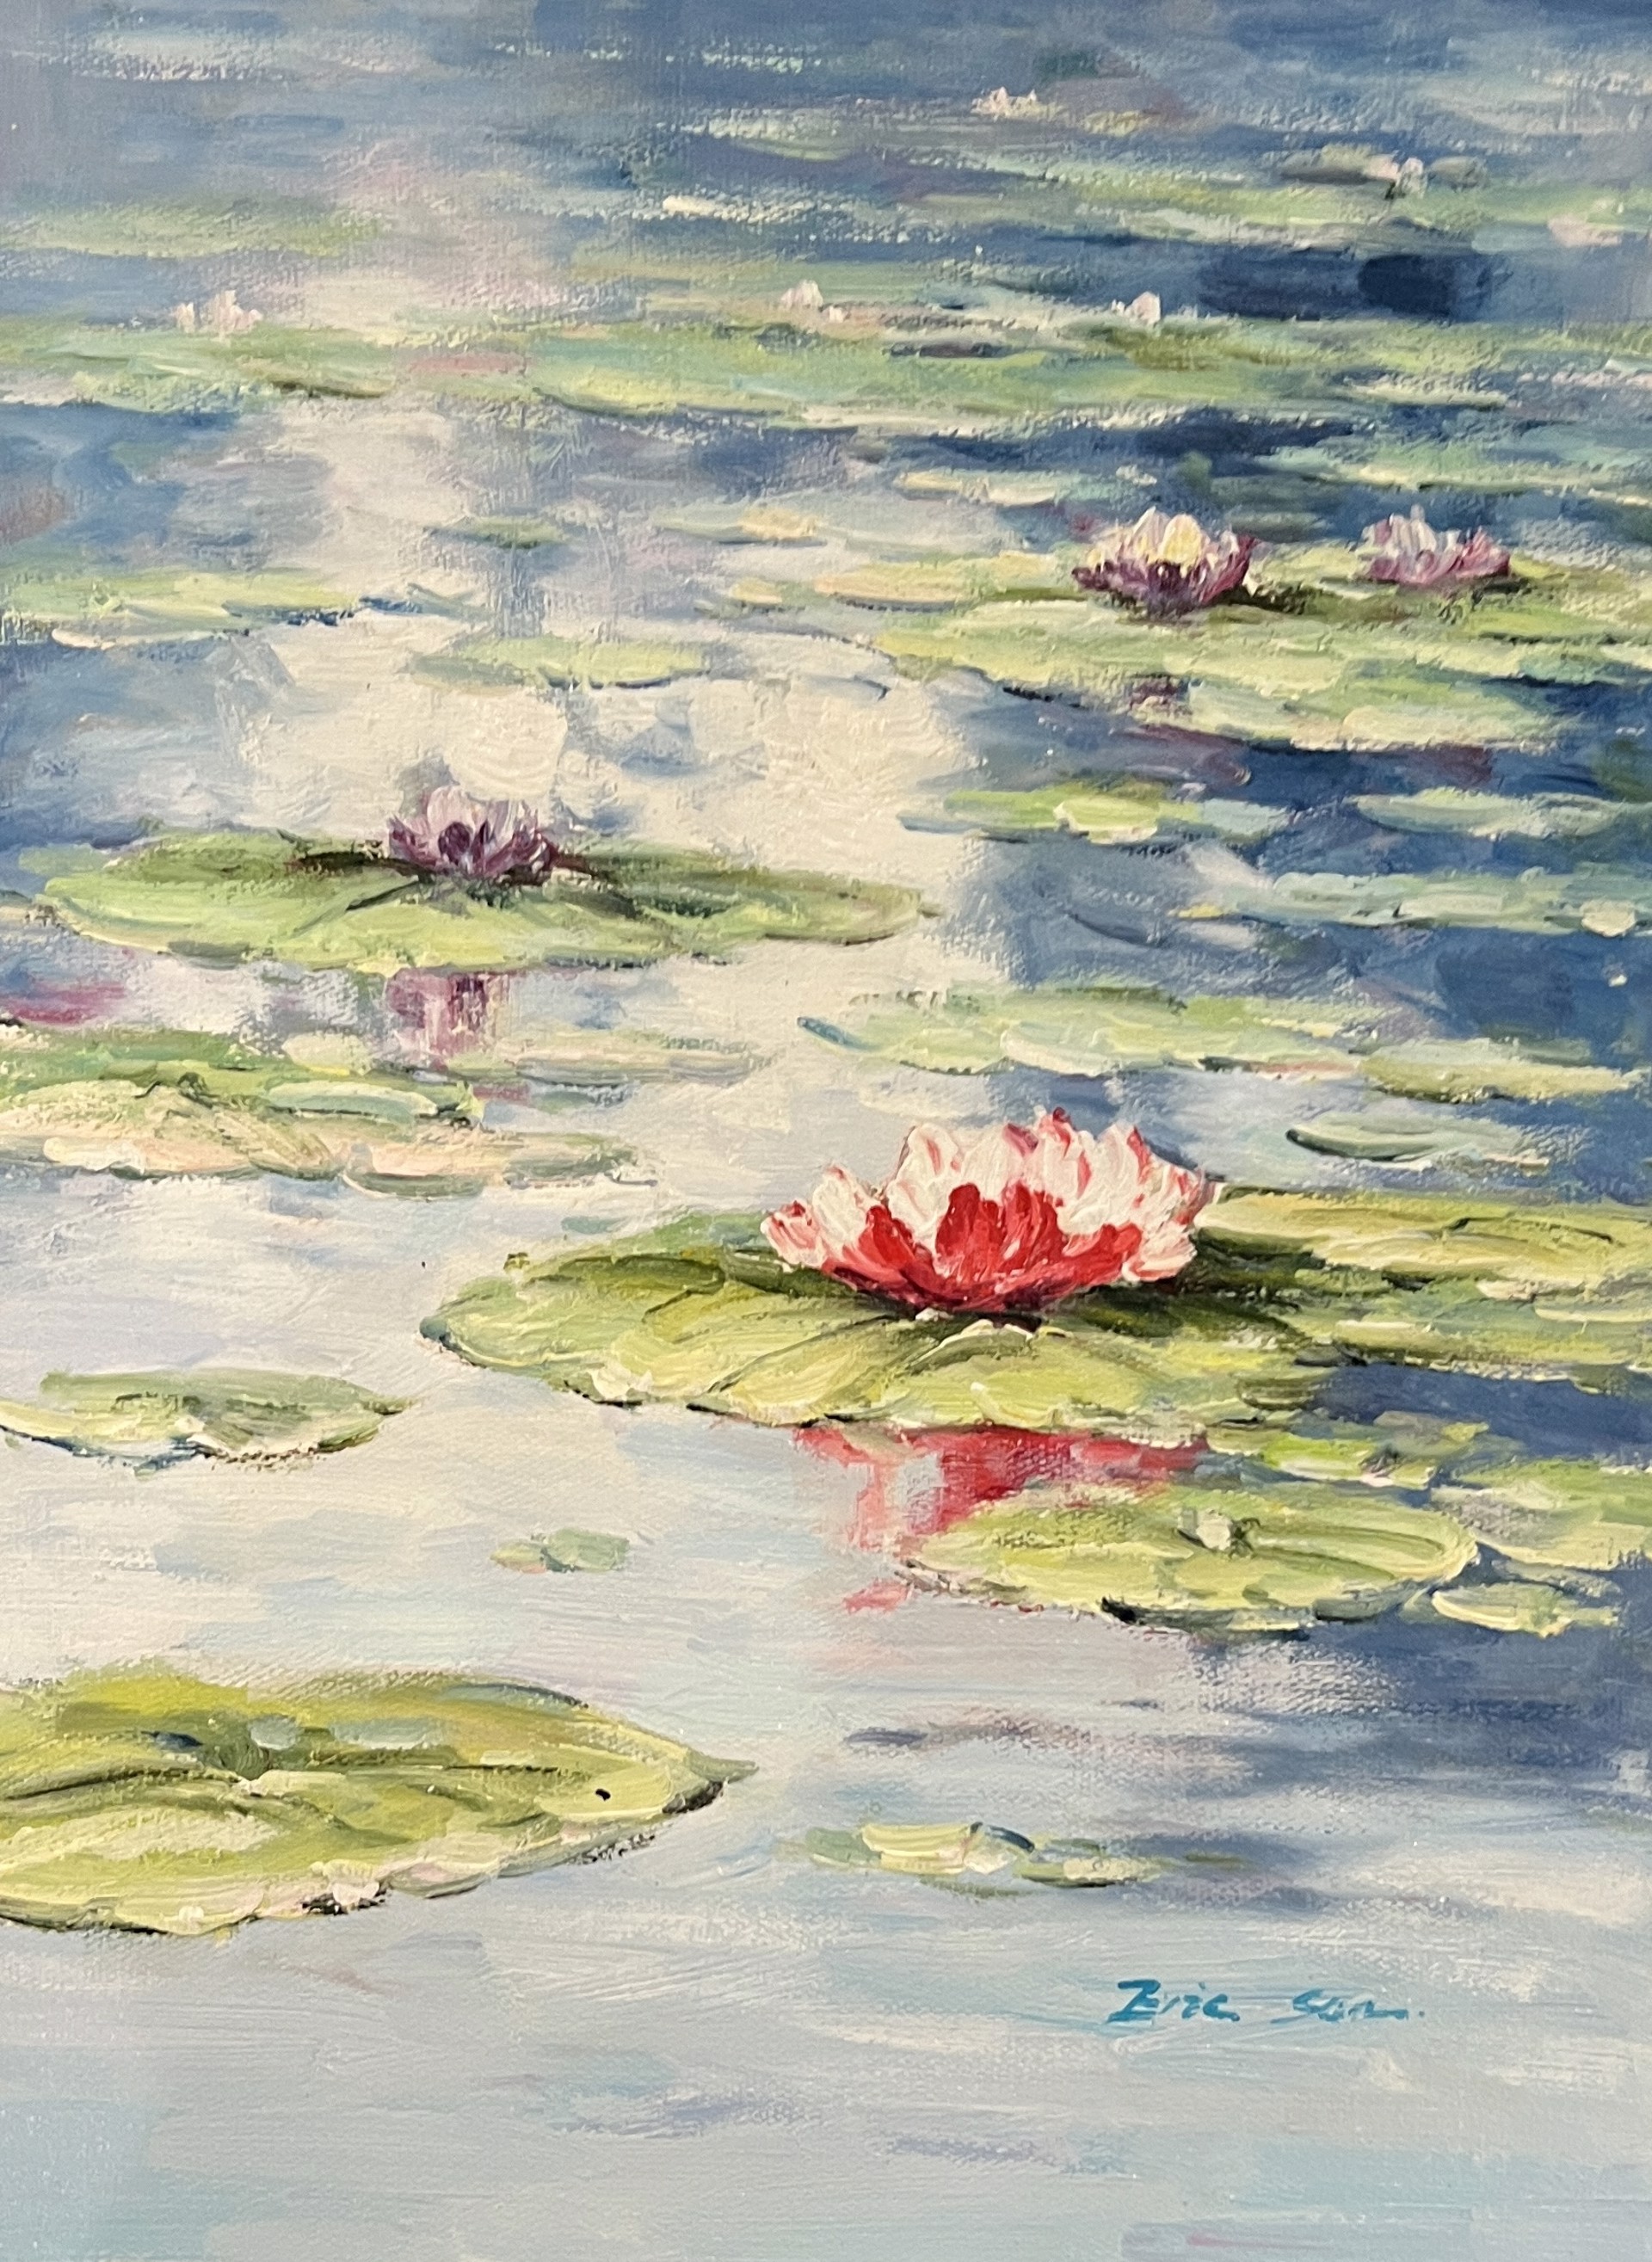 WATER LILLIES IN BLOOM by ERIC SUN